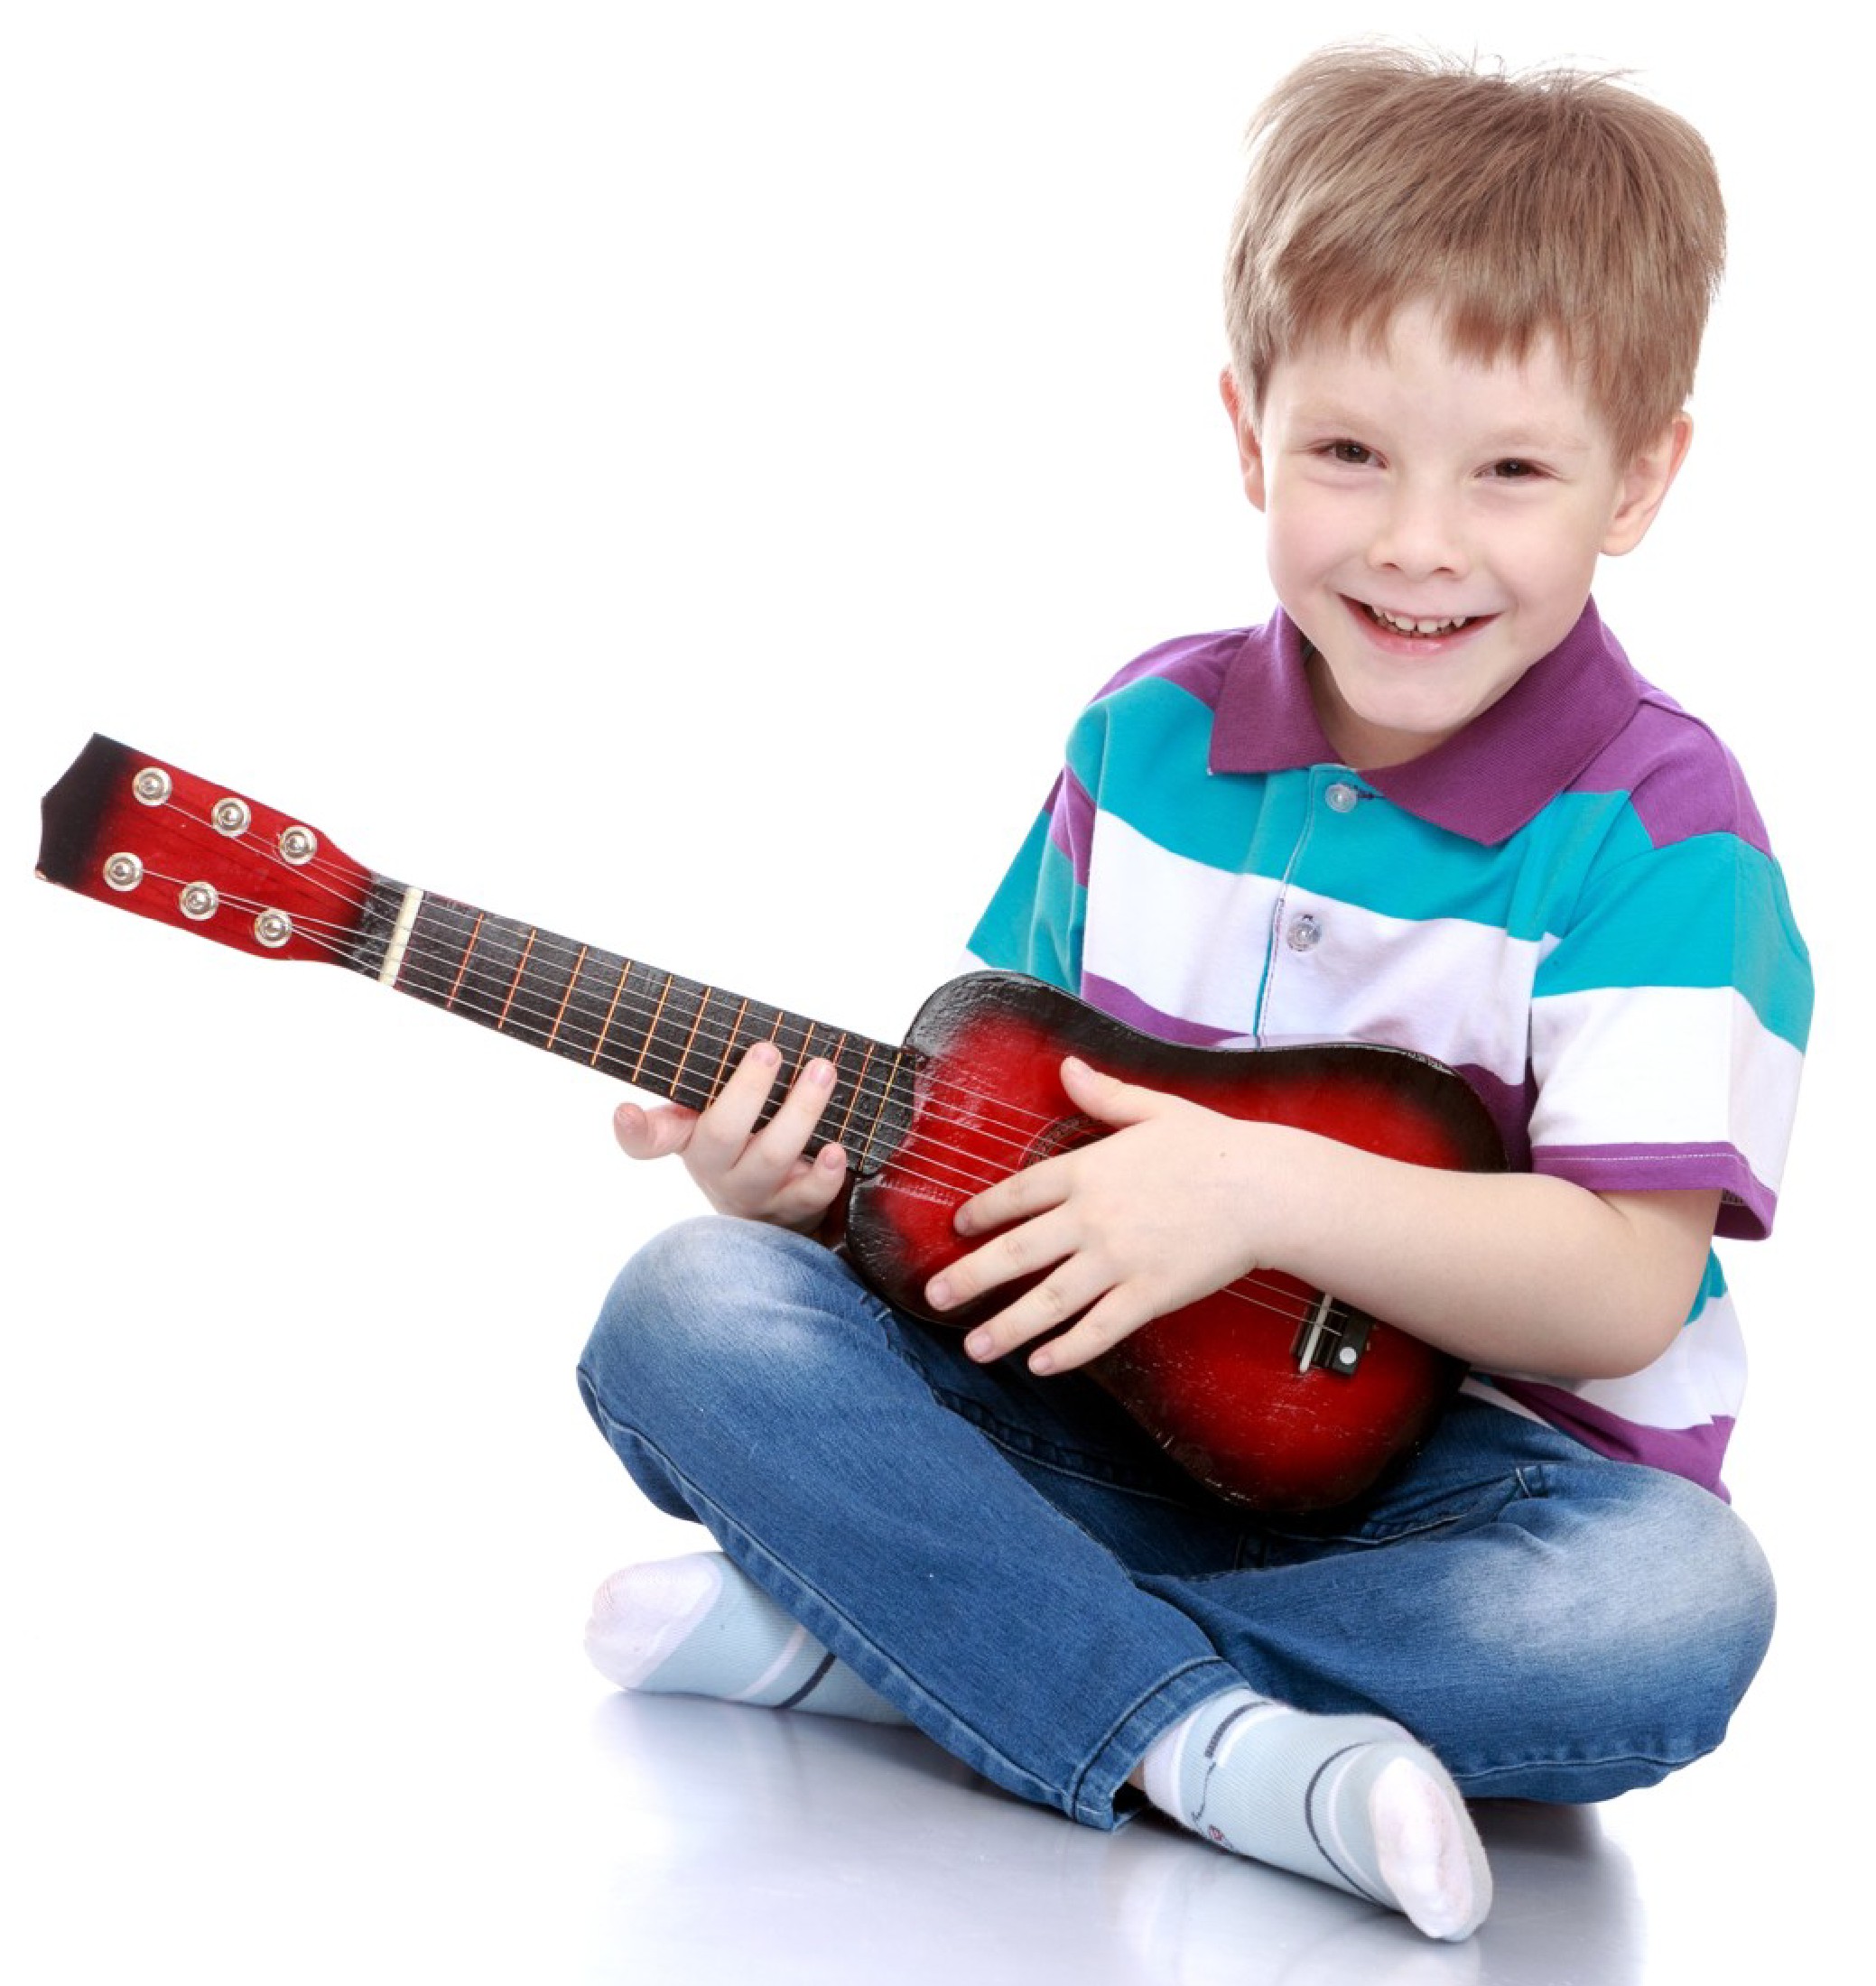 Half size guitar. Small boy learning to play a half size acoustic guitar